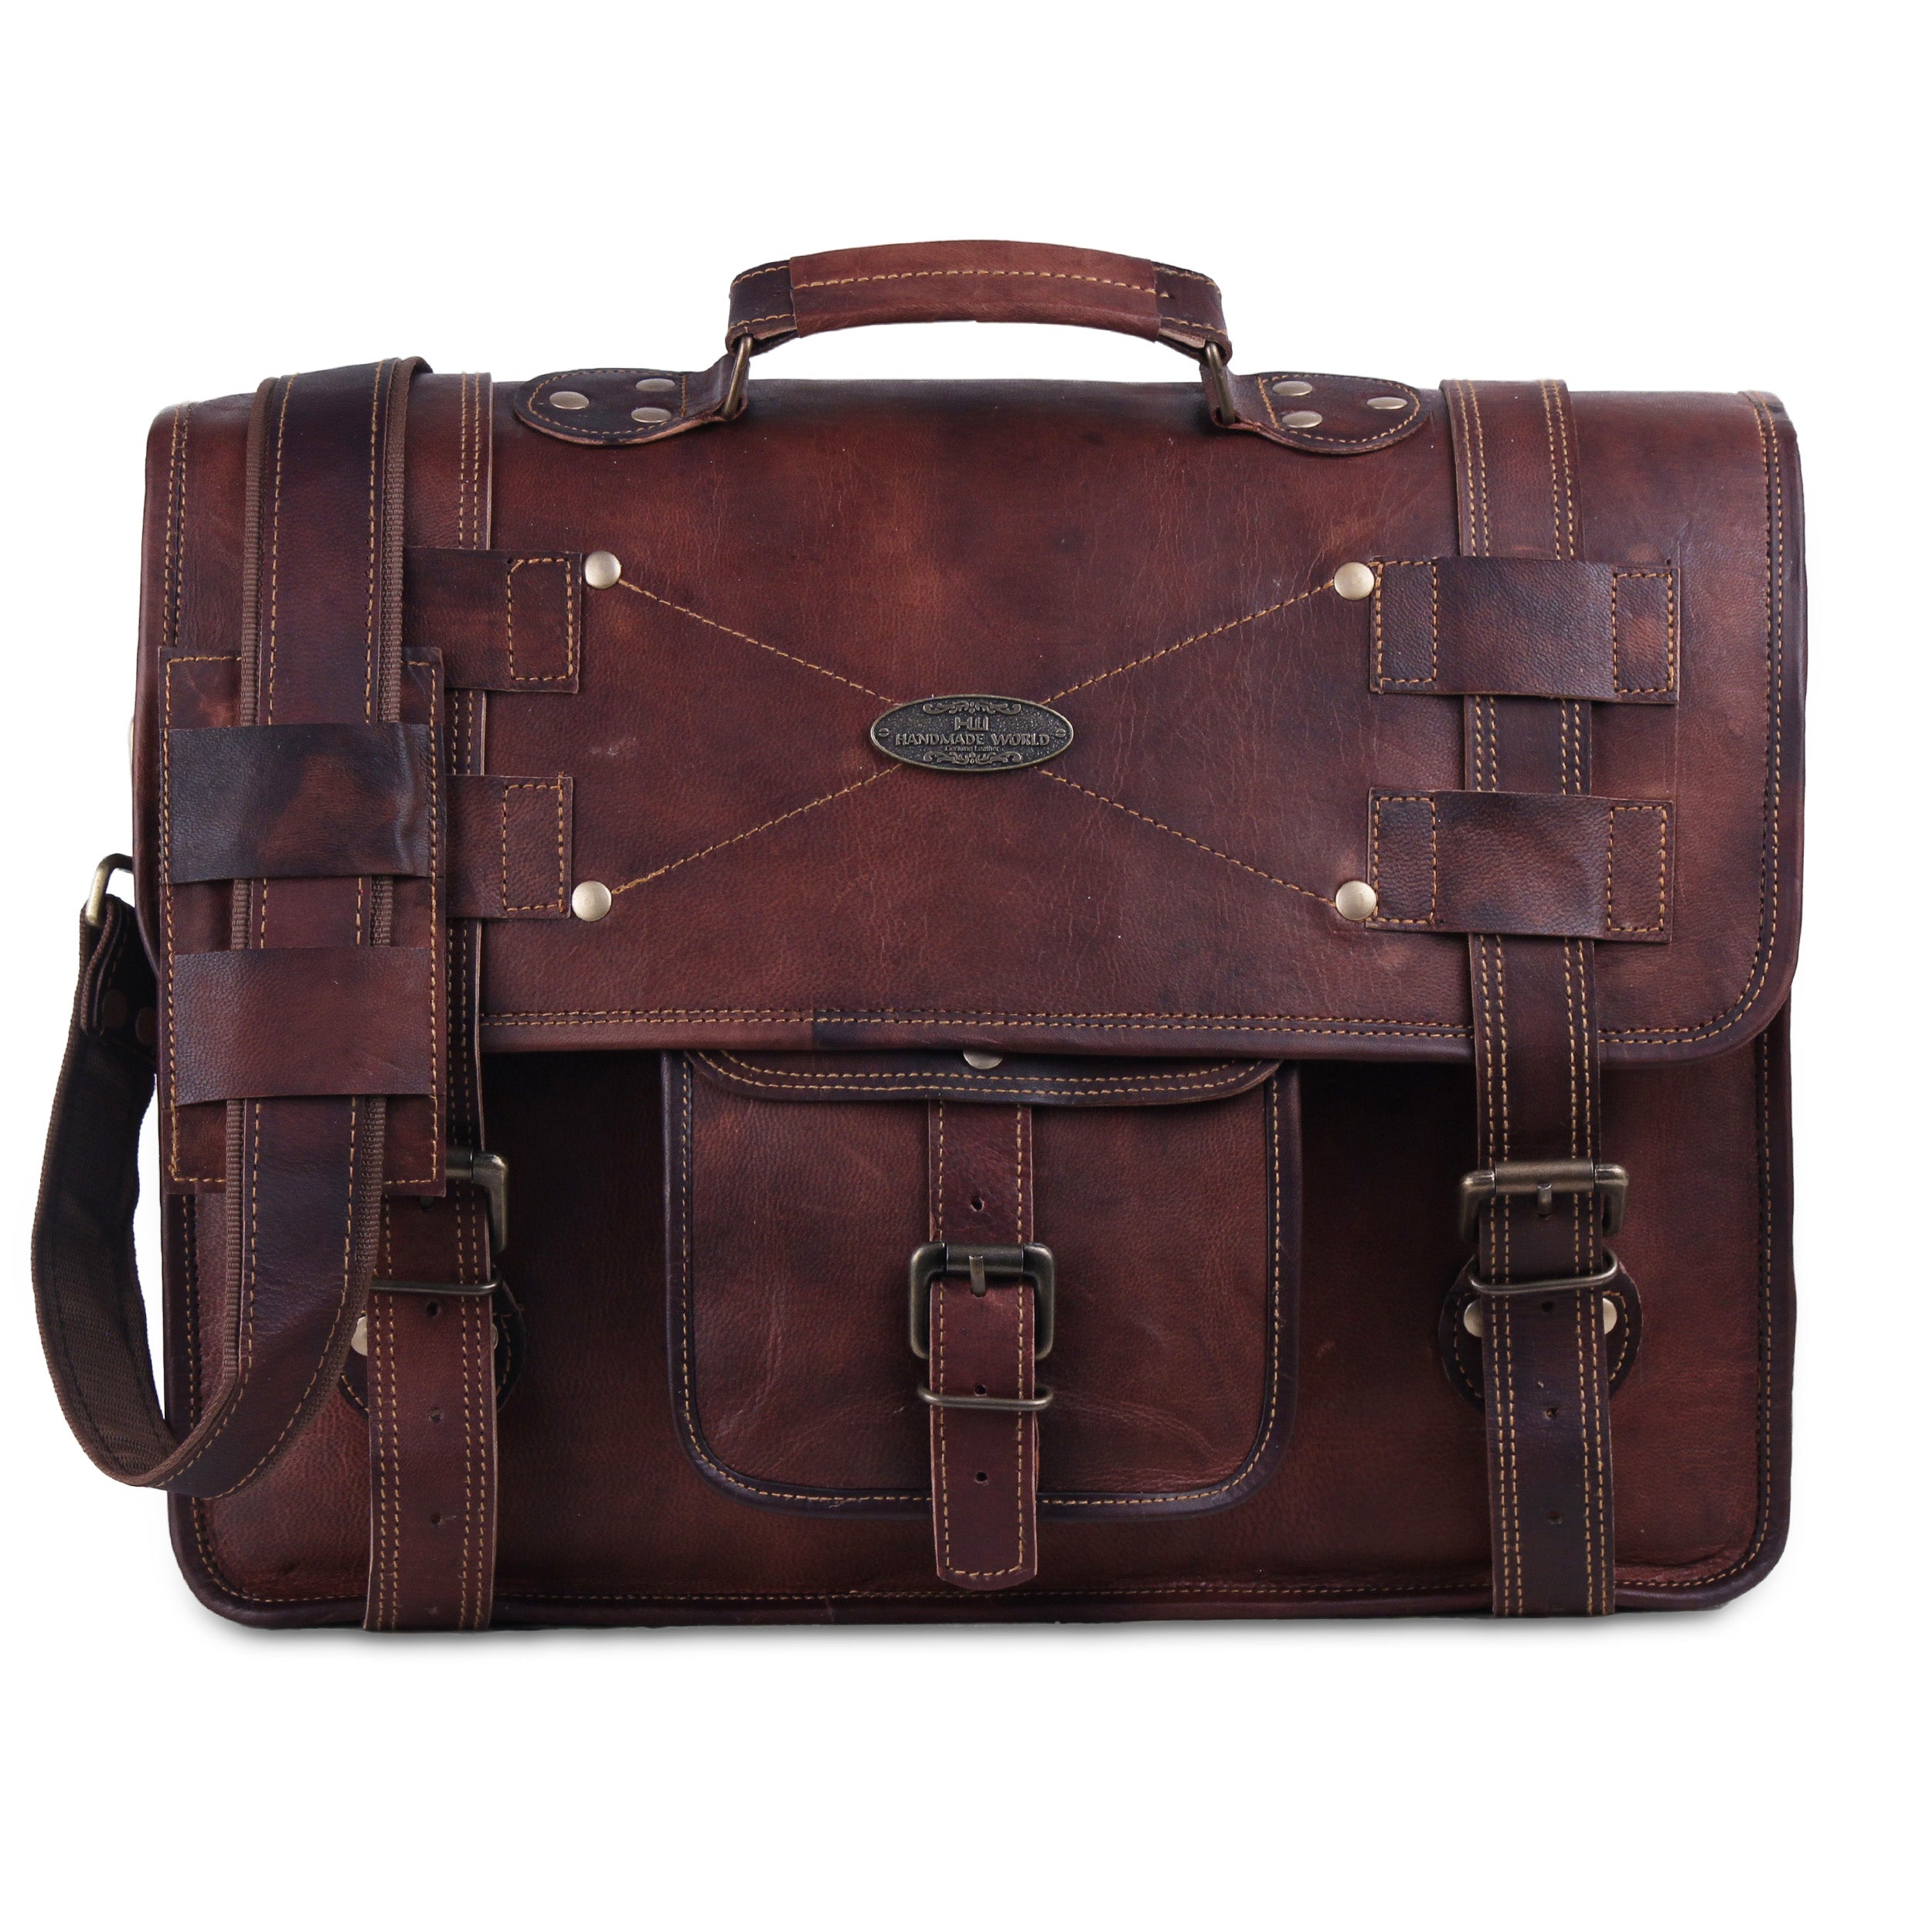 Best Leather Messenger Bags for Men | Hulsh Leather Bags